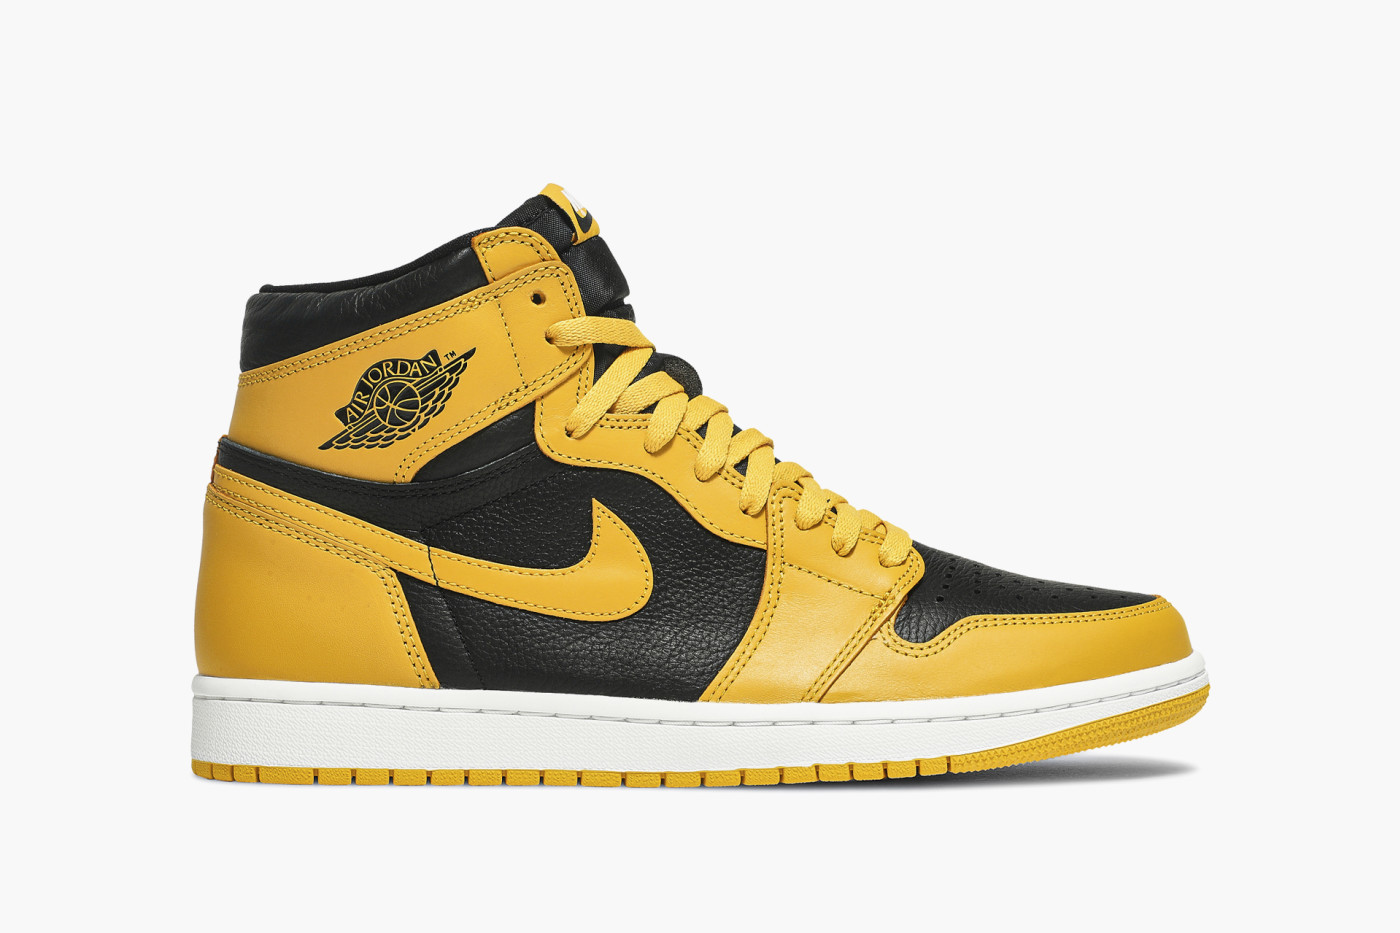 black and yellow jordans that just came out